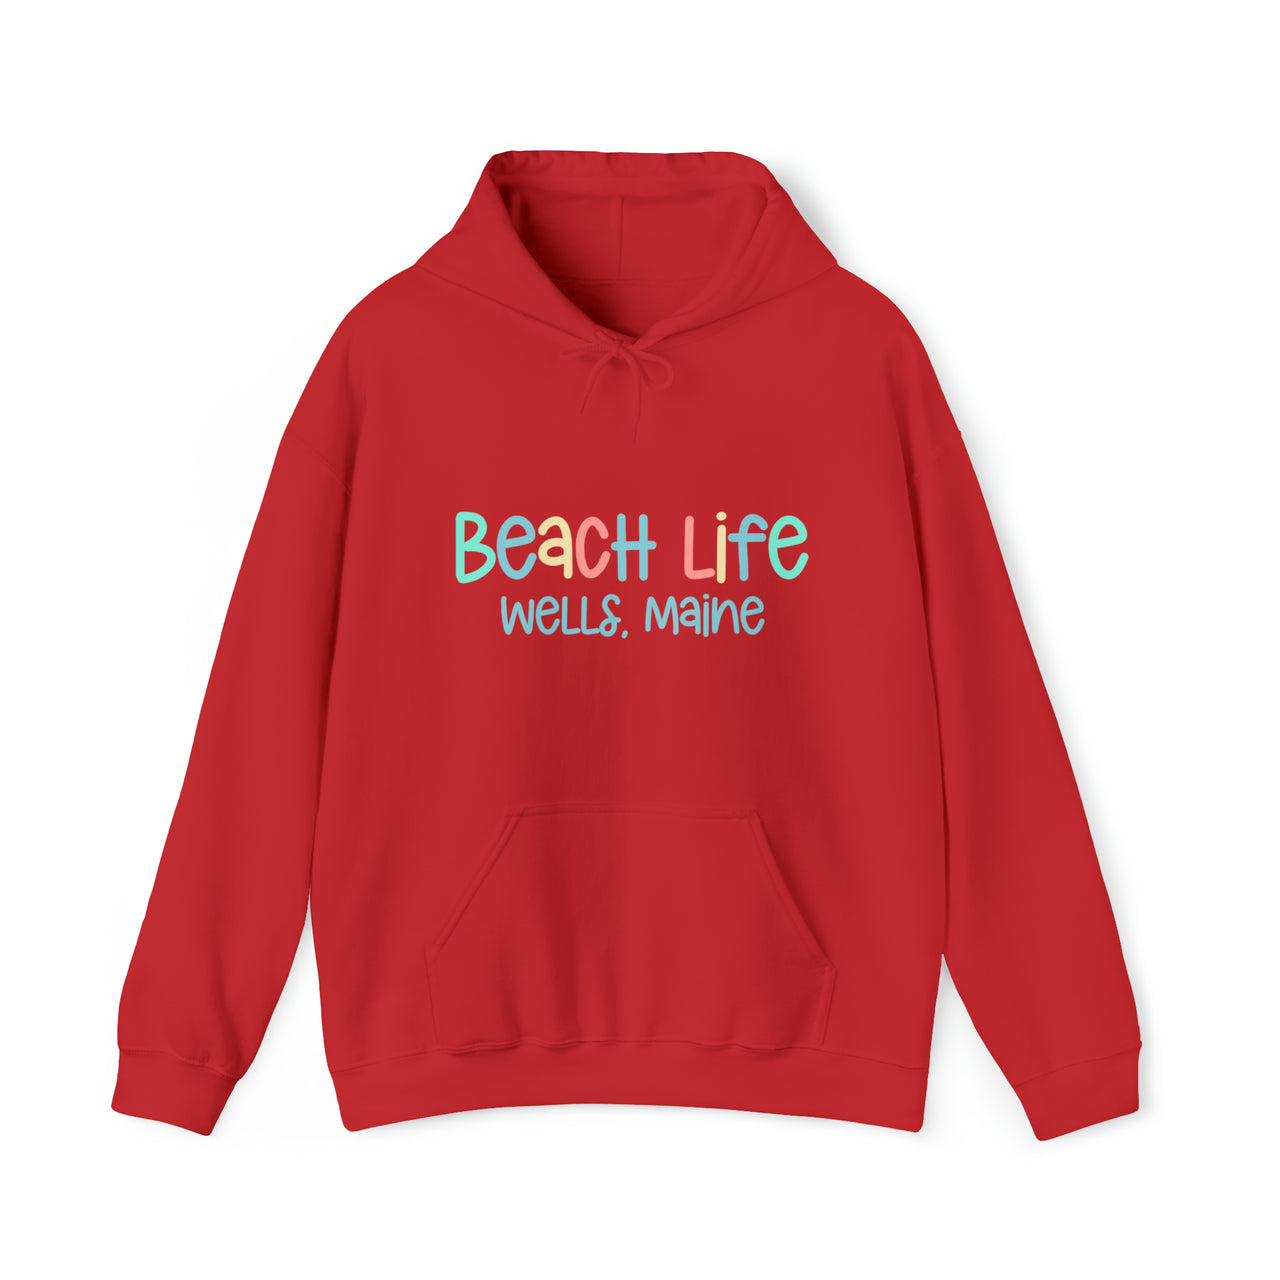 Beach Life Heavy Blend Hooded Sweatshirt, Personalized, Red